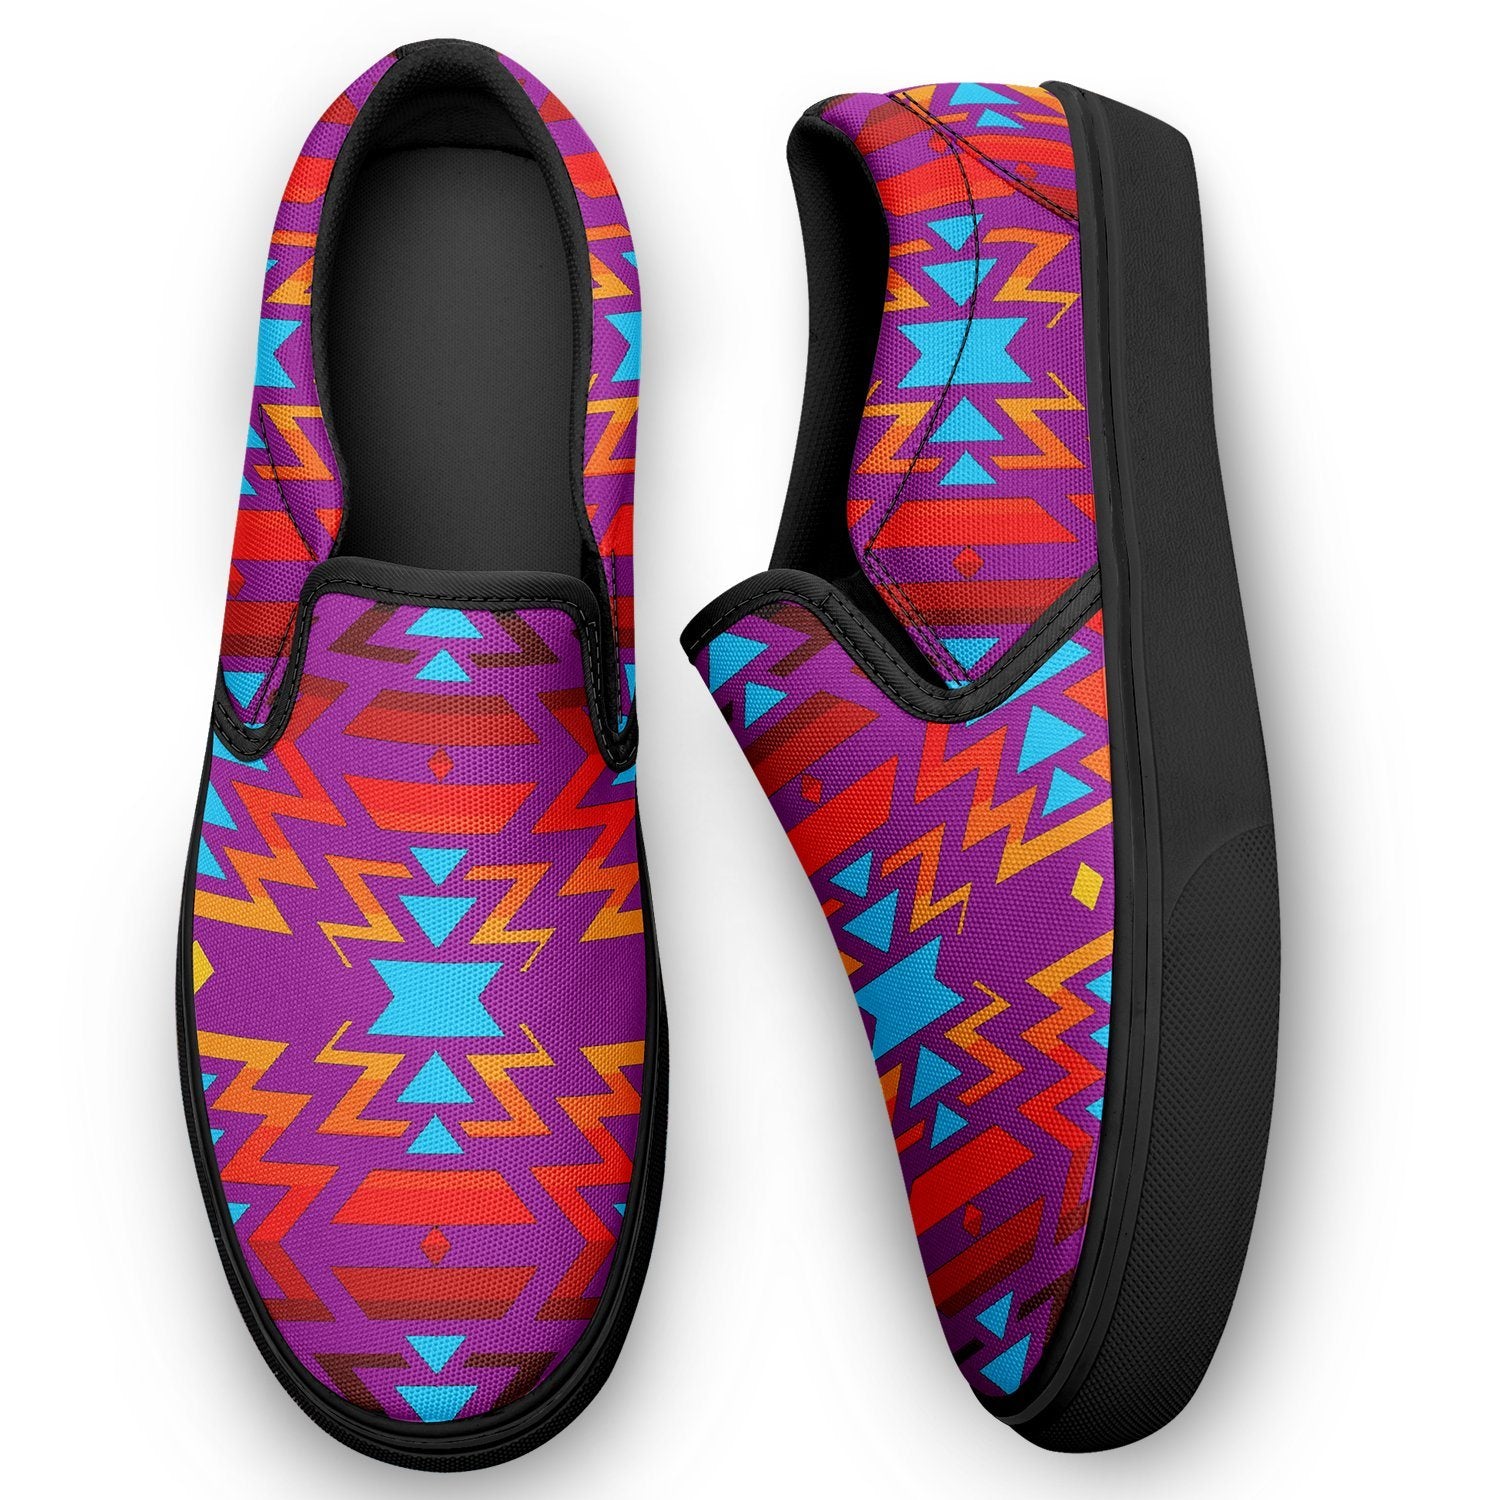 Fire Colors and Turquoise Purple Otoyimm Canvas Slip On Shoes 49 Dzine 